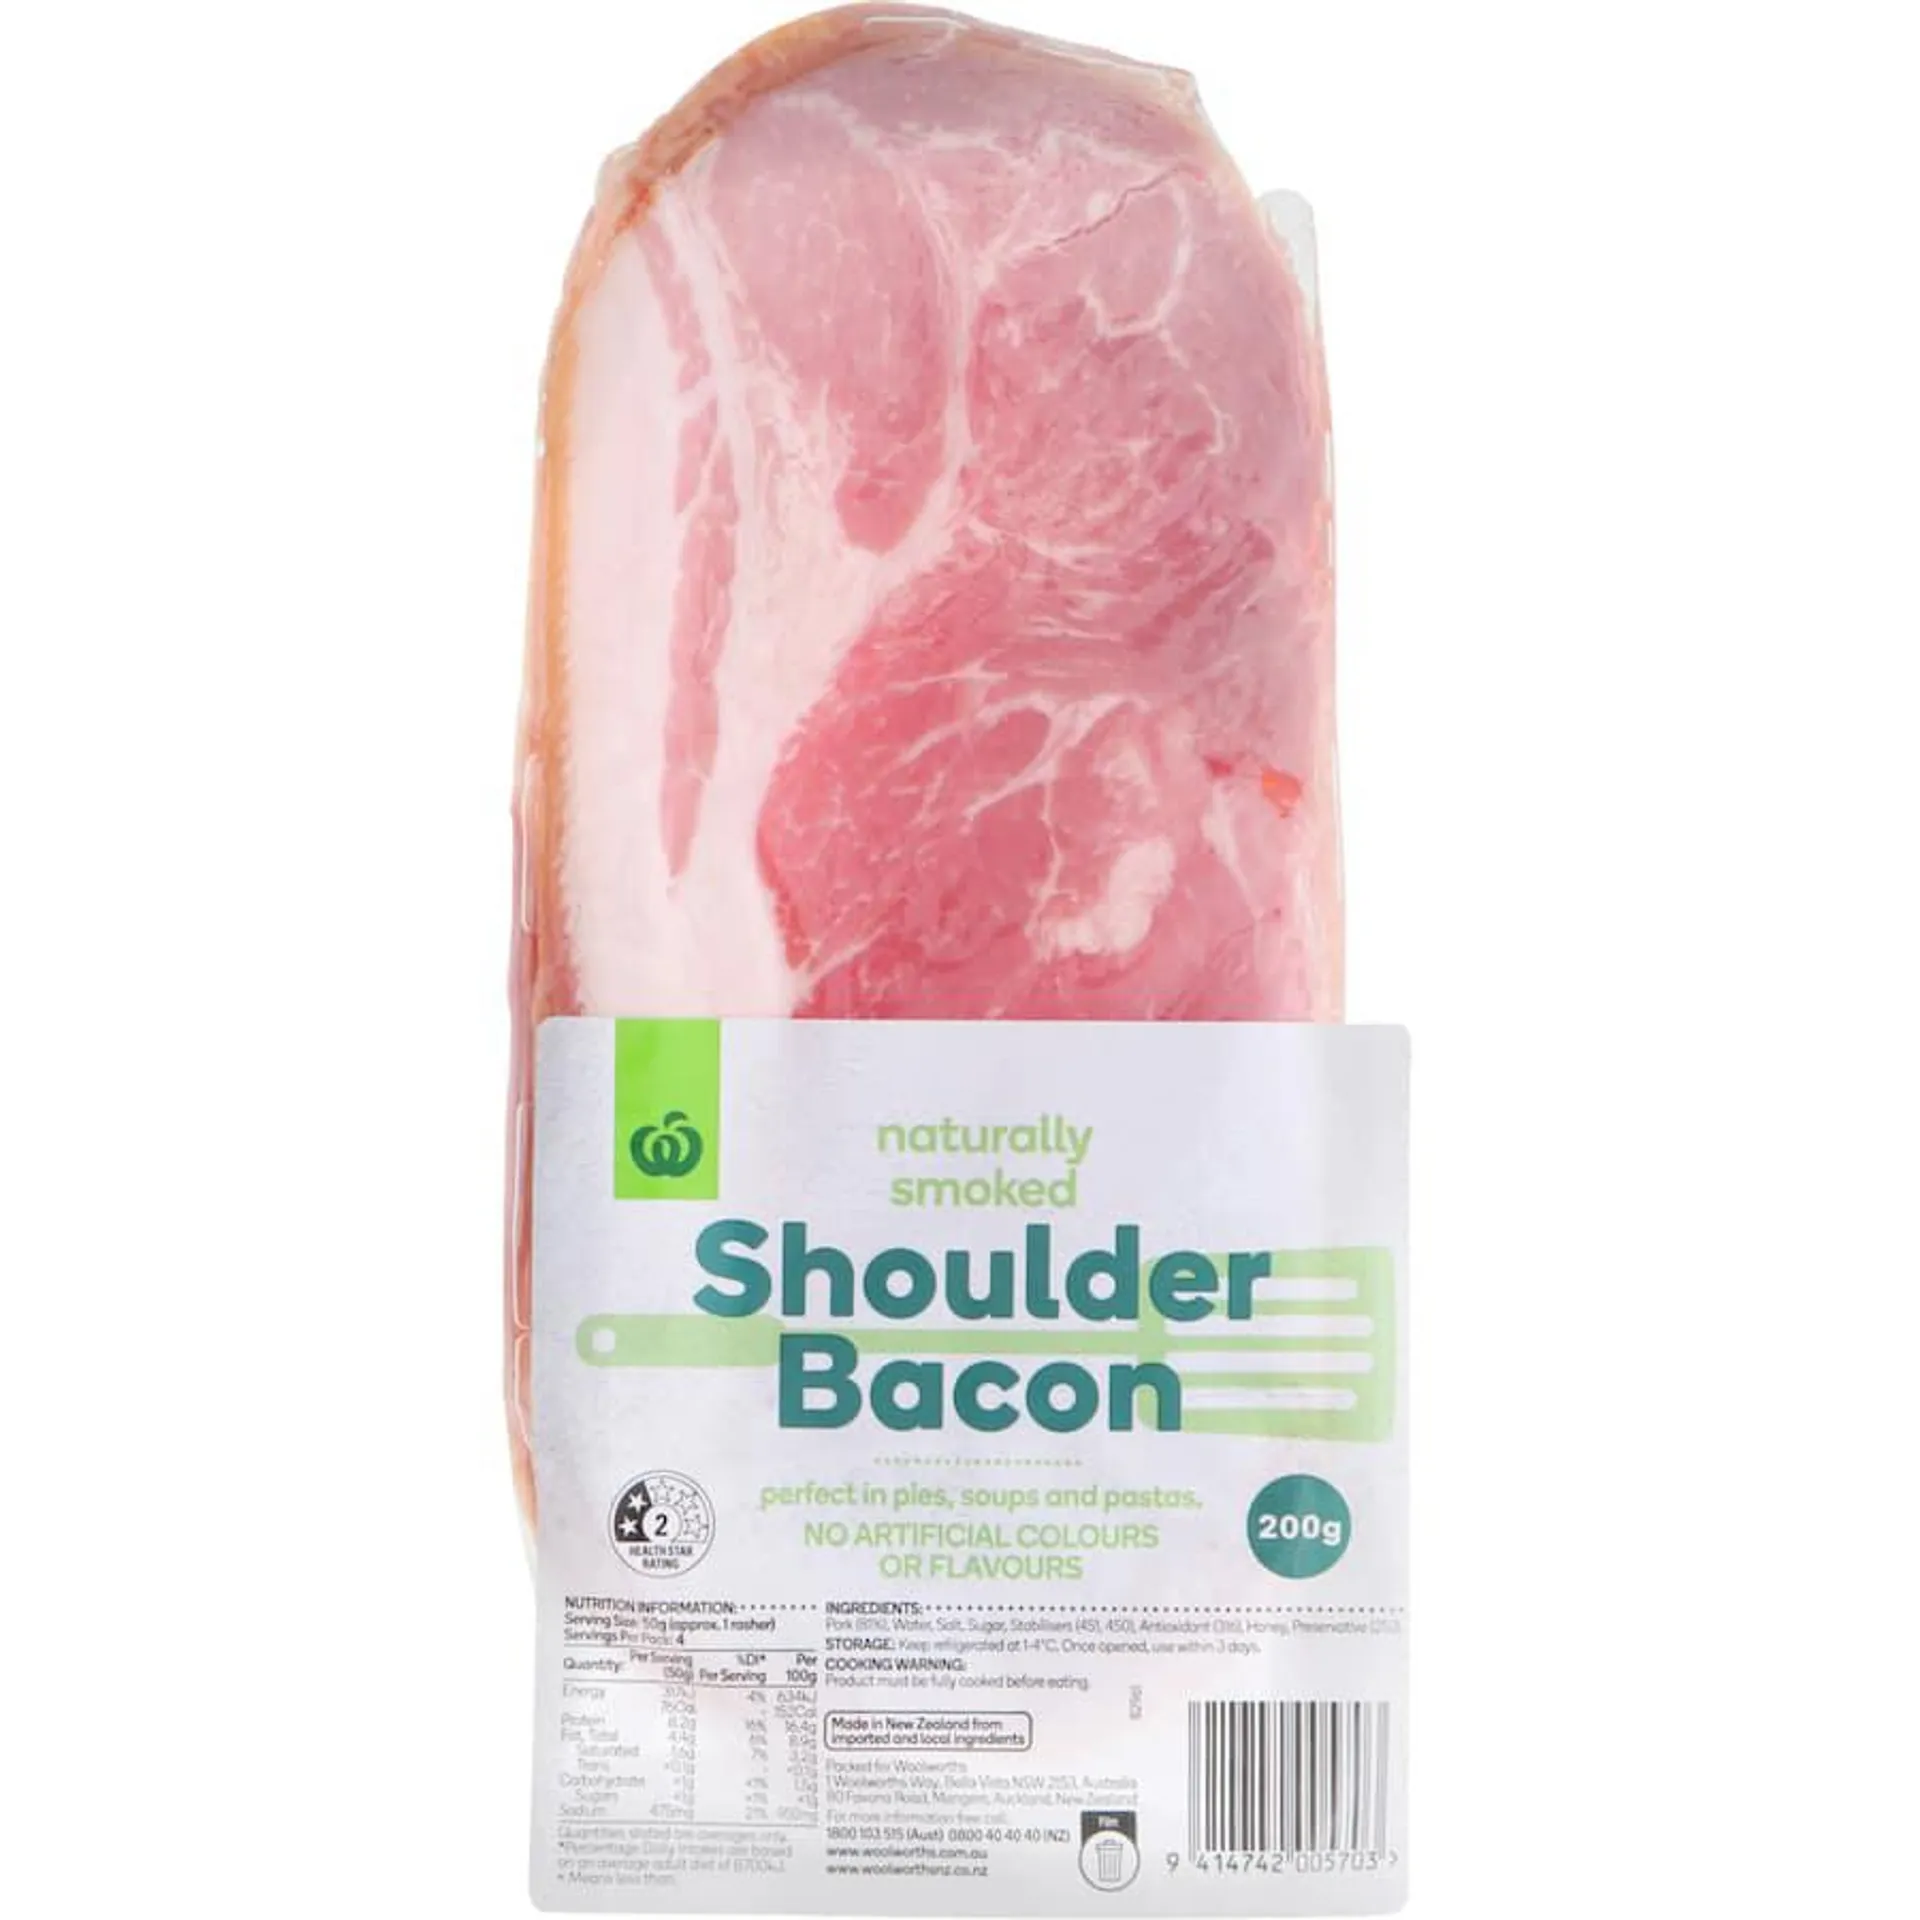 Woolworths Shoulder Bacon